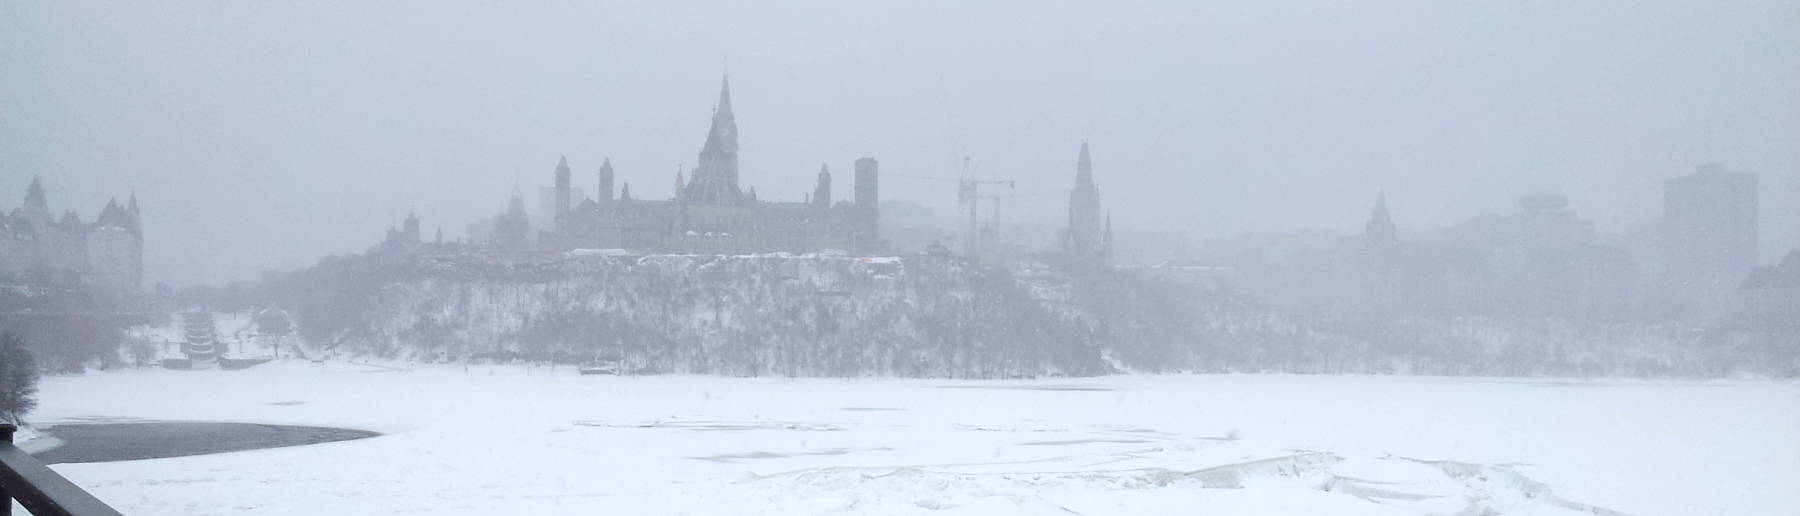 Parliament Hill in Ottawa, seen from the bridge to Gatineau.